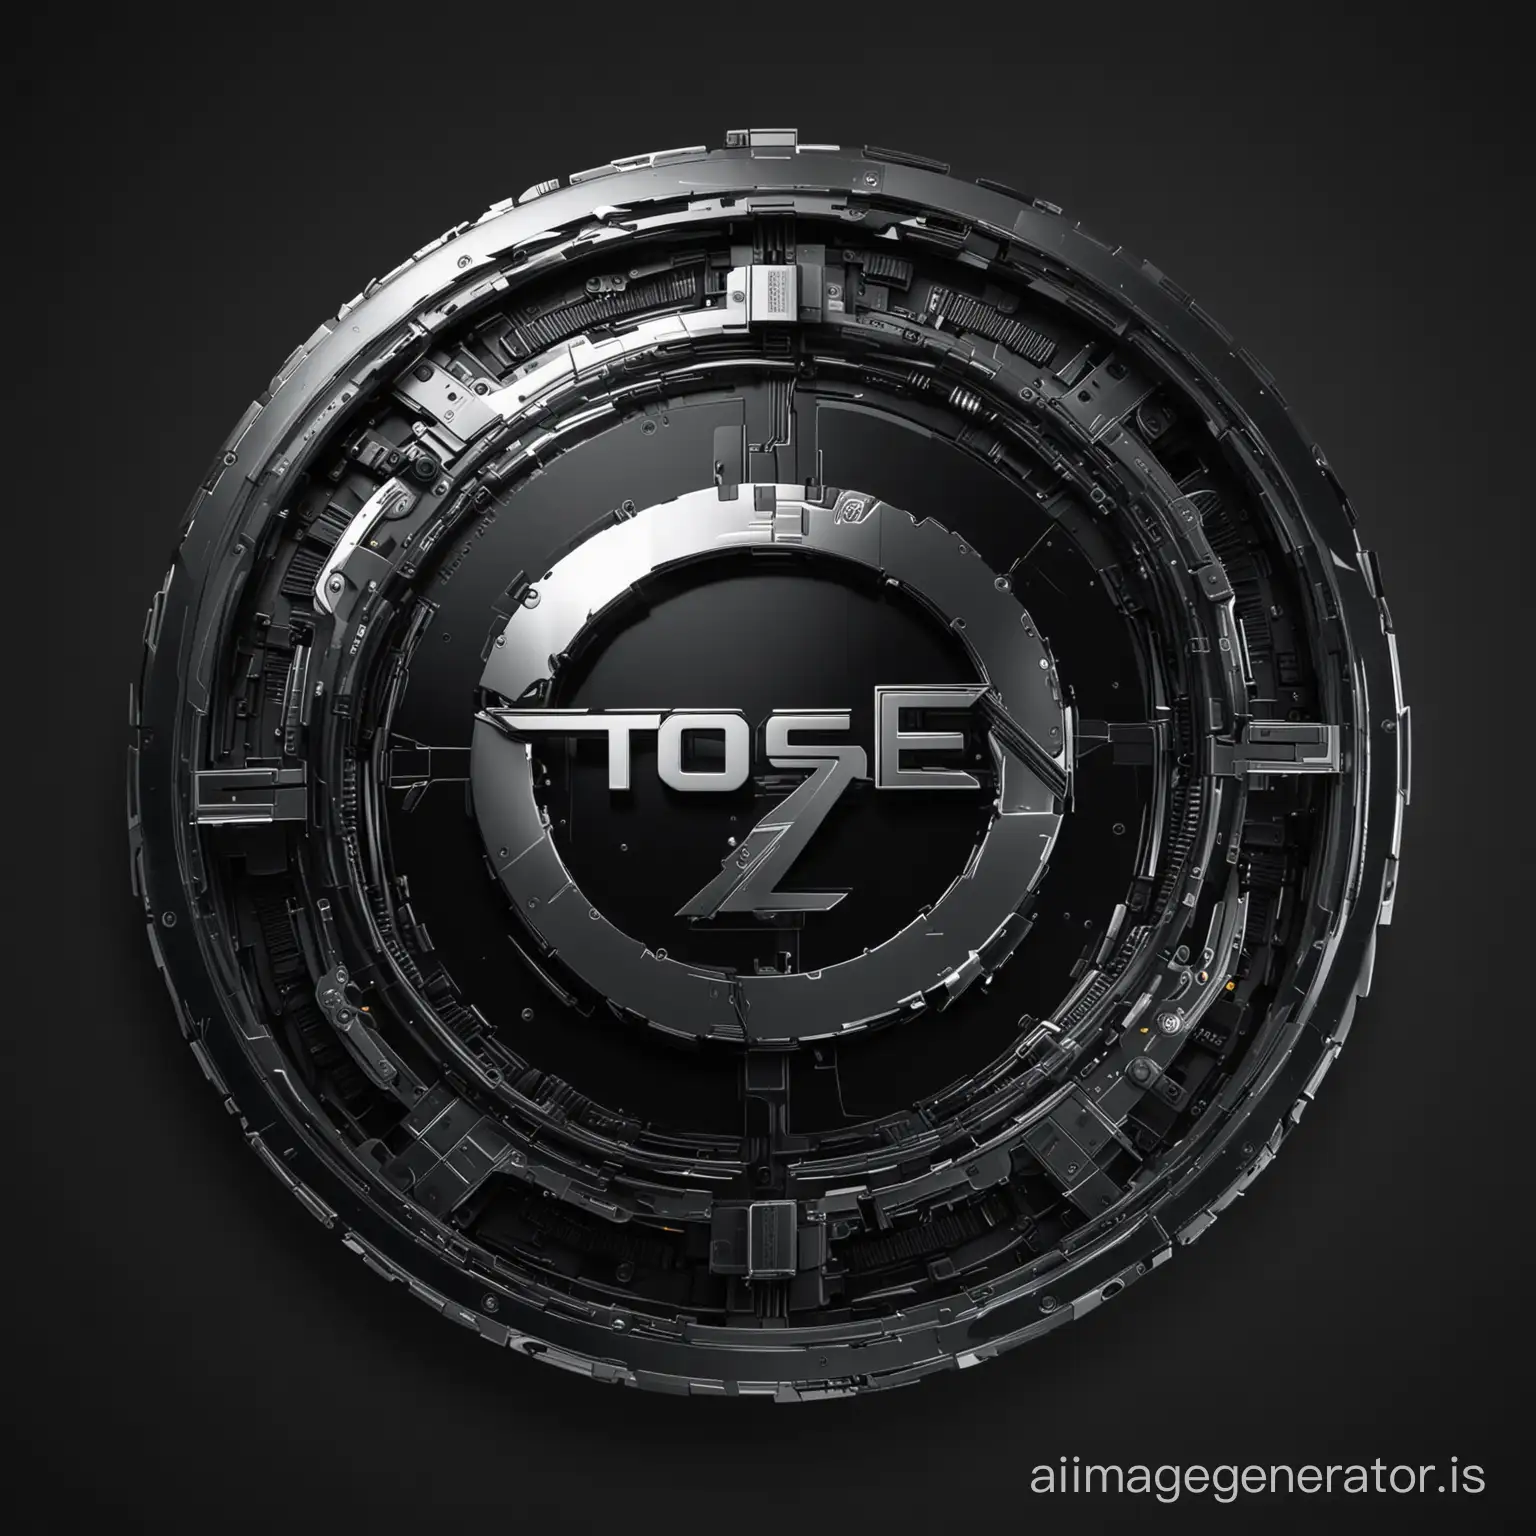 Cyberpunk-Circular-Logo-with-ToSe7en-Text-in-Techy-Black-and-Chrome